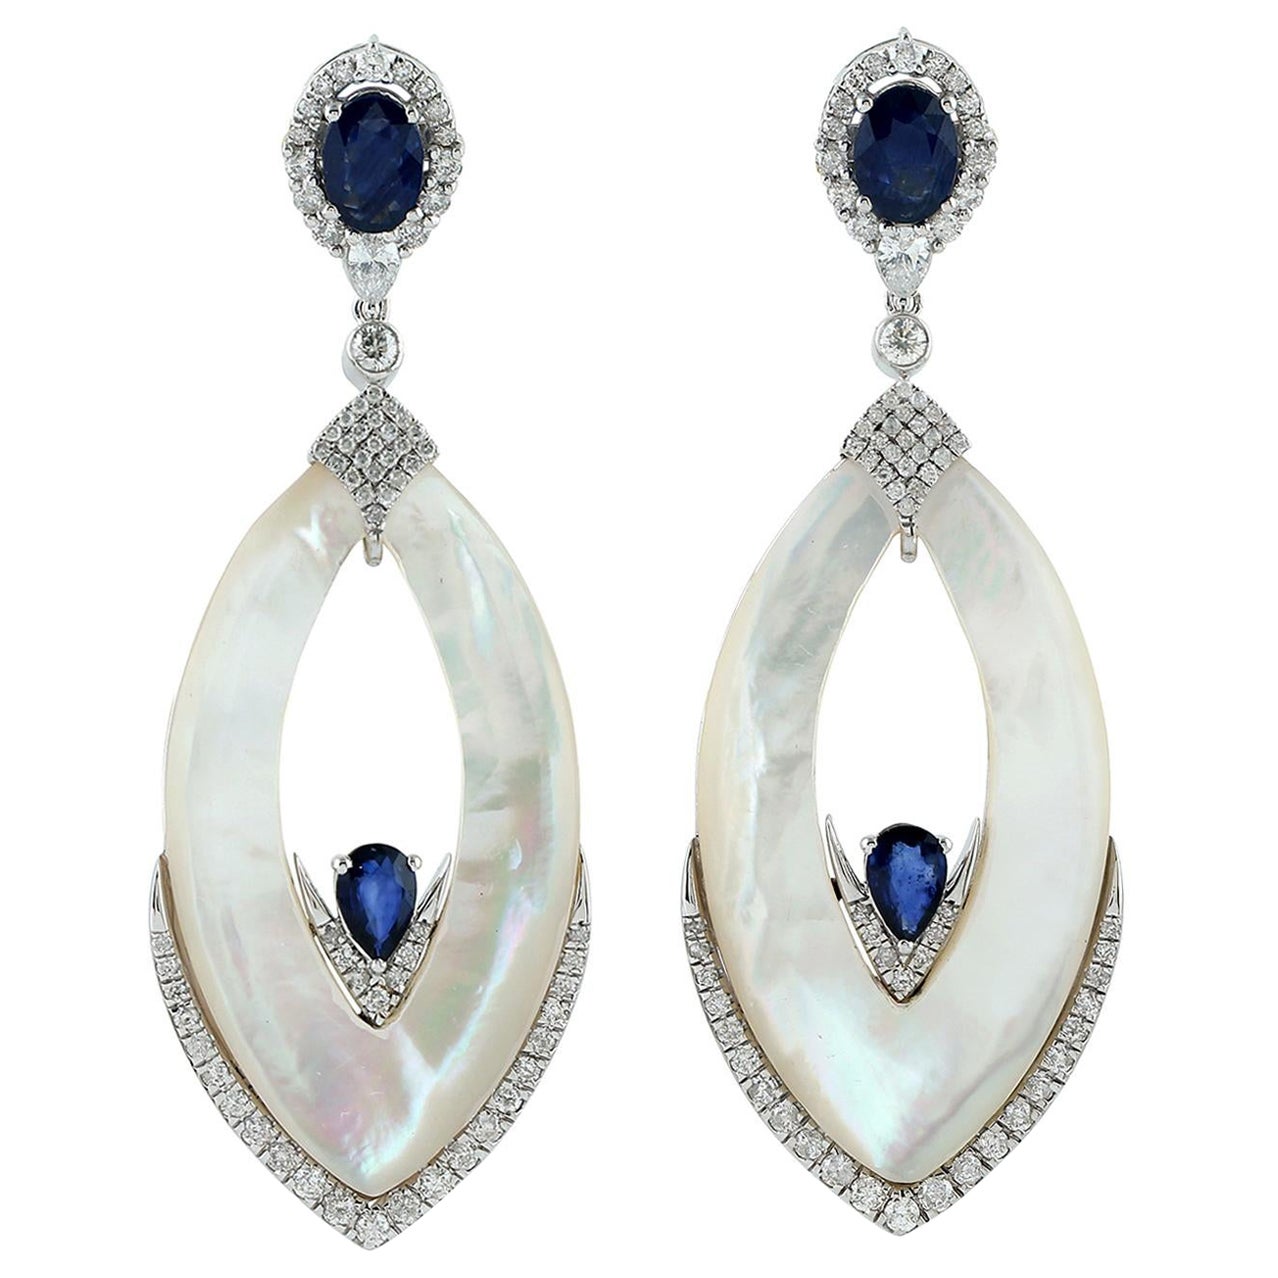 Ornamental Marquise Shaped Pearl Earrings With Blue Sapphire & Diamonds